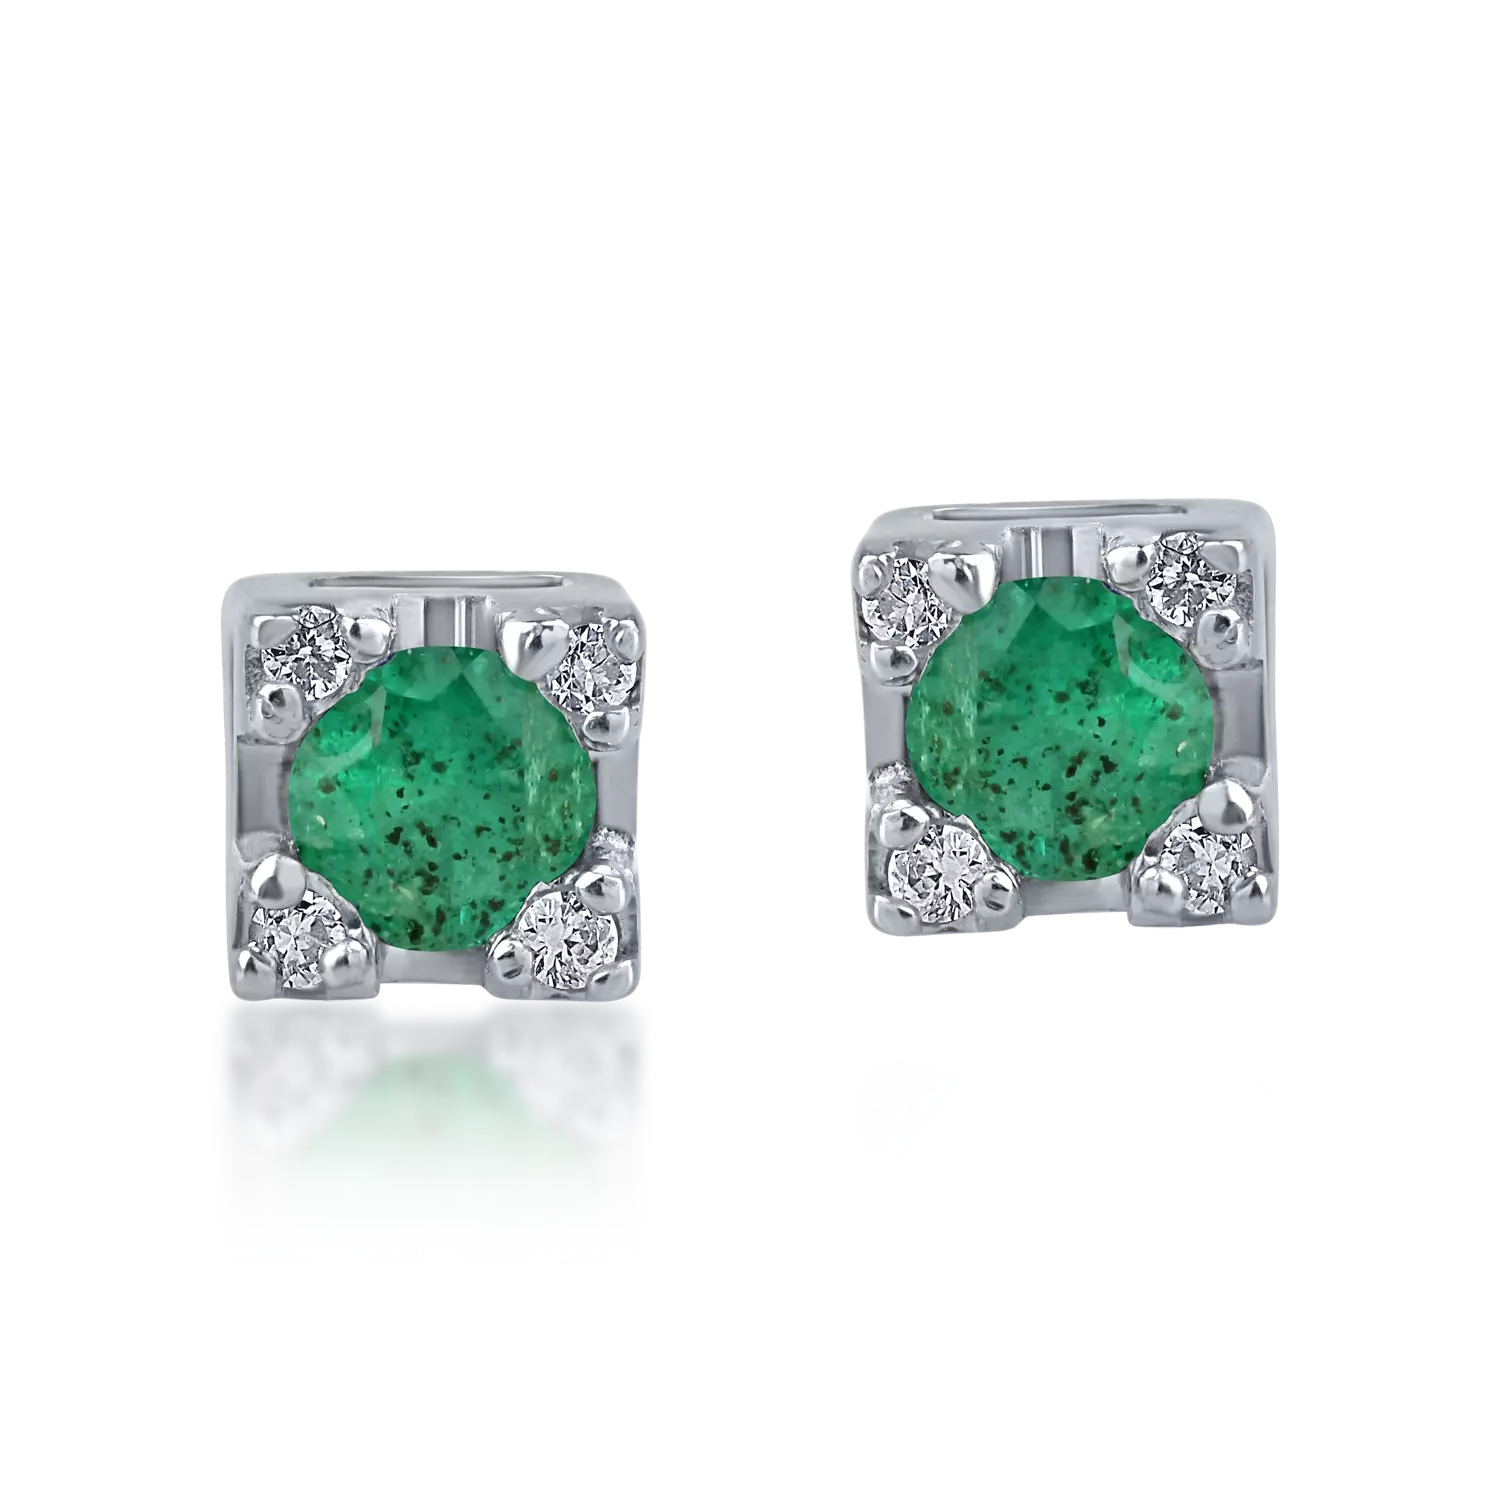 White gold earrings with 0.19ct emeralds and 0.03ct diamonds